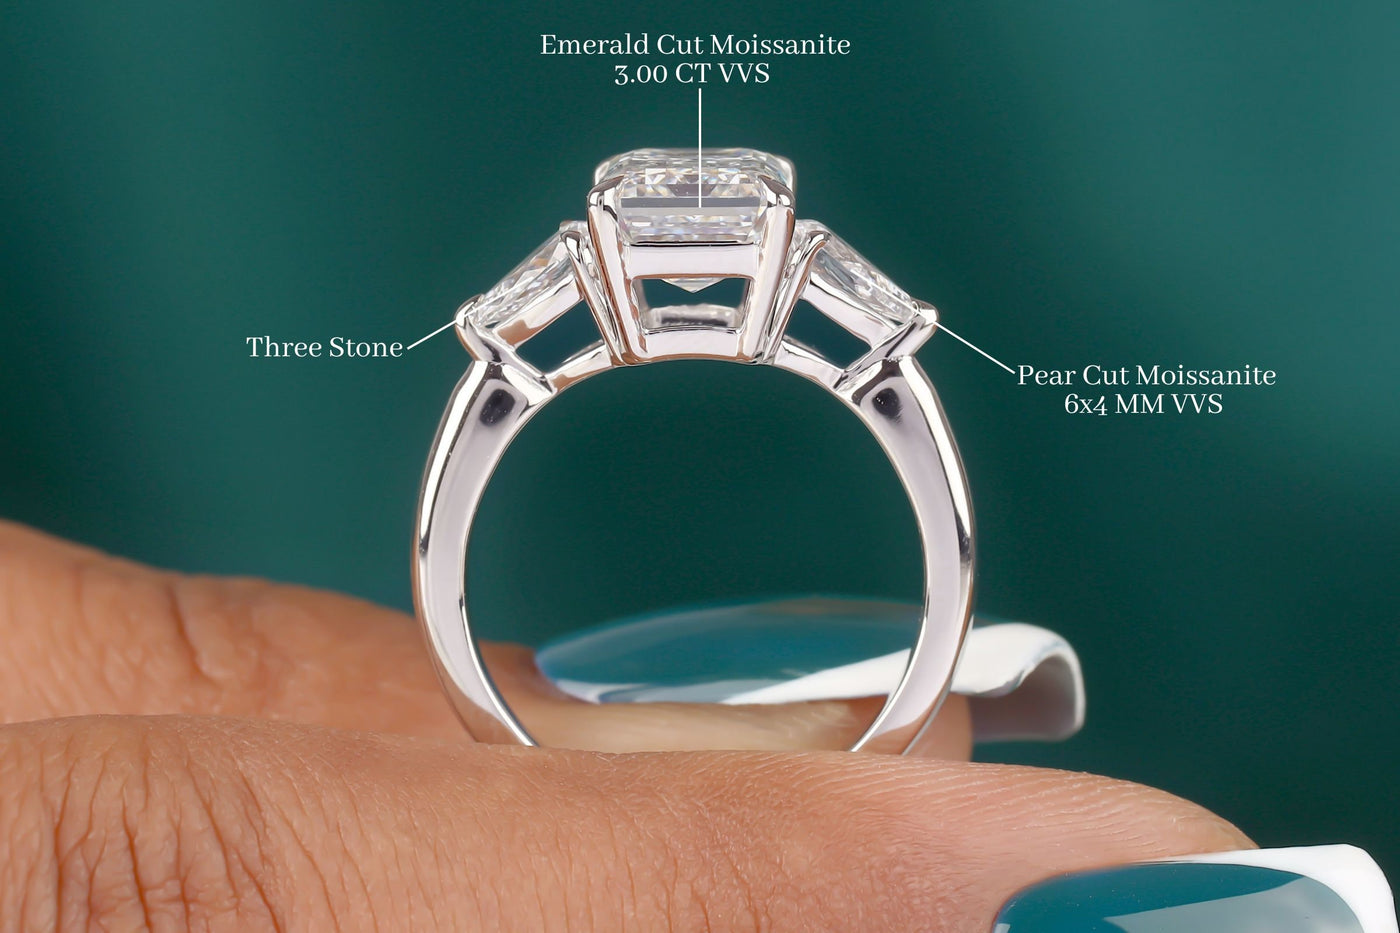 Three Stone Solitaire Ring, 3 CT Emerald Cut Colorless Moissanite Engagement Ring, Solid 14K White Gold Ring, Pear Moissanite Wedding Ring